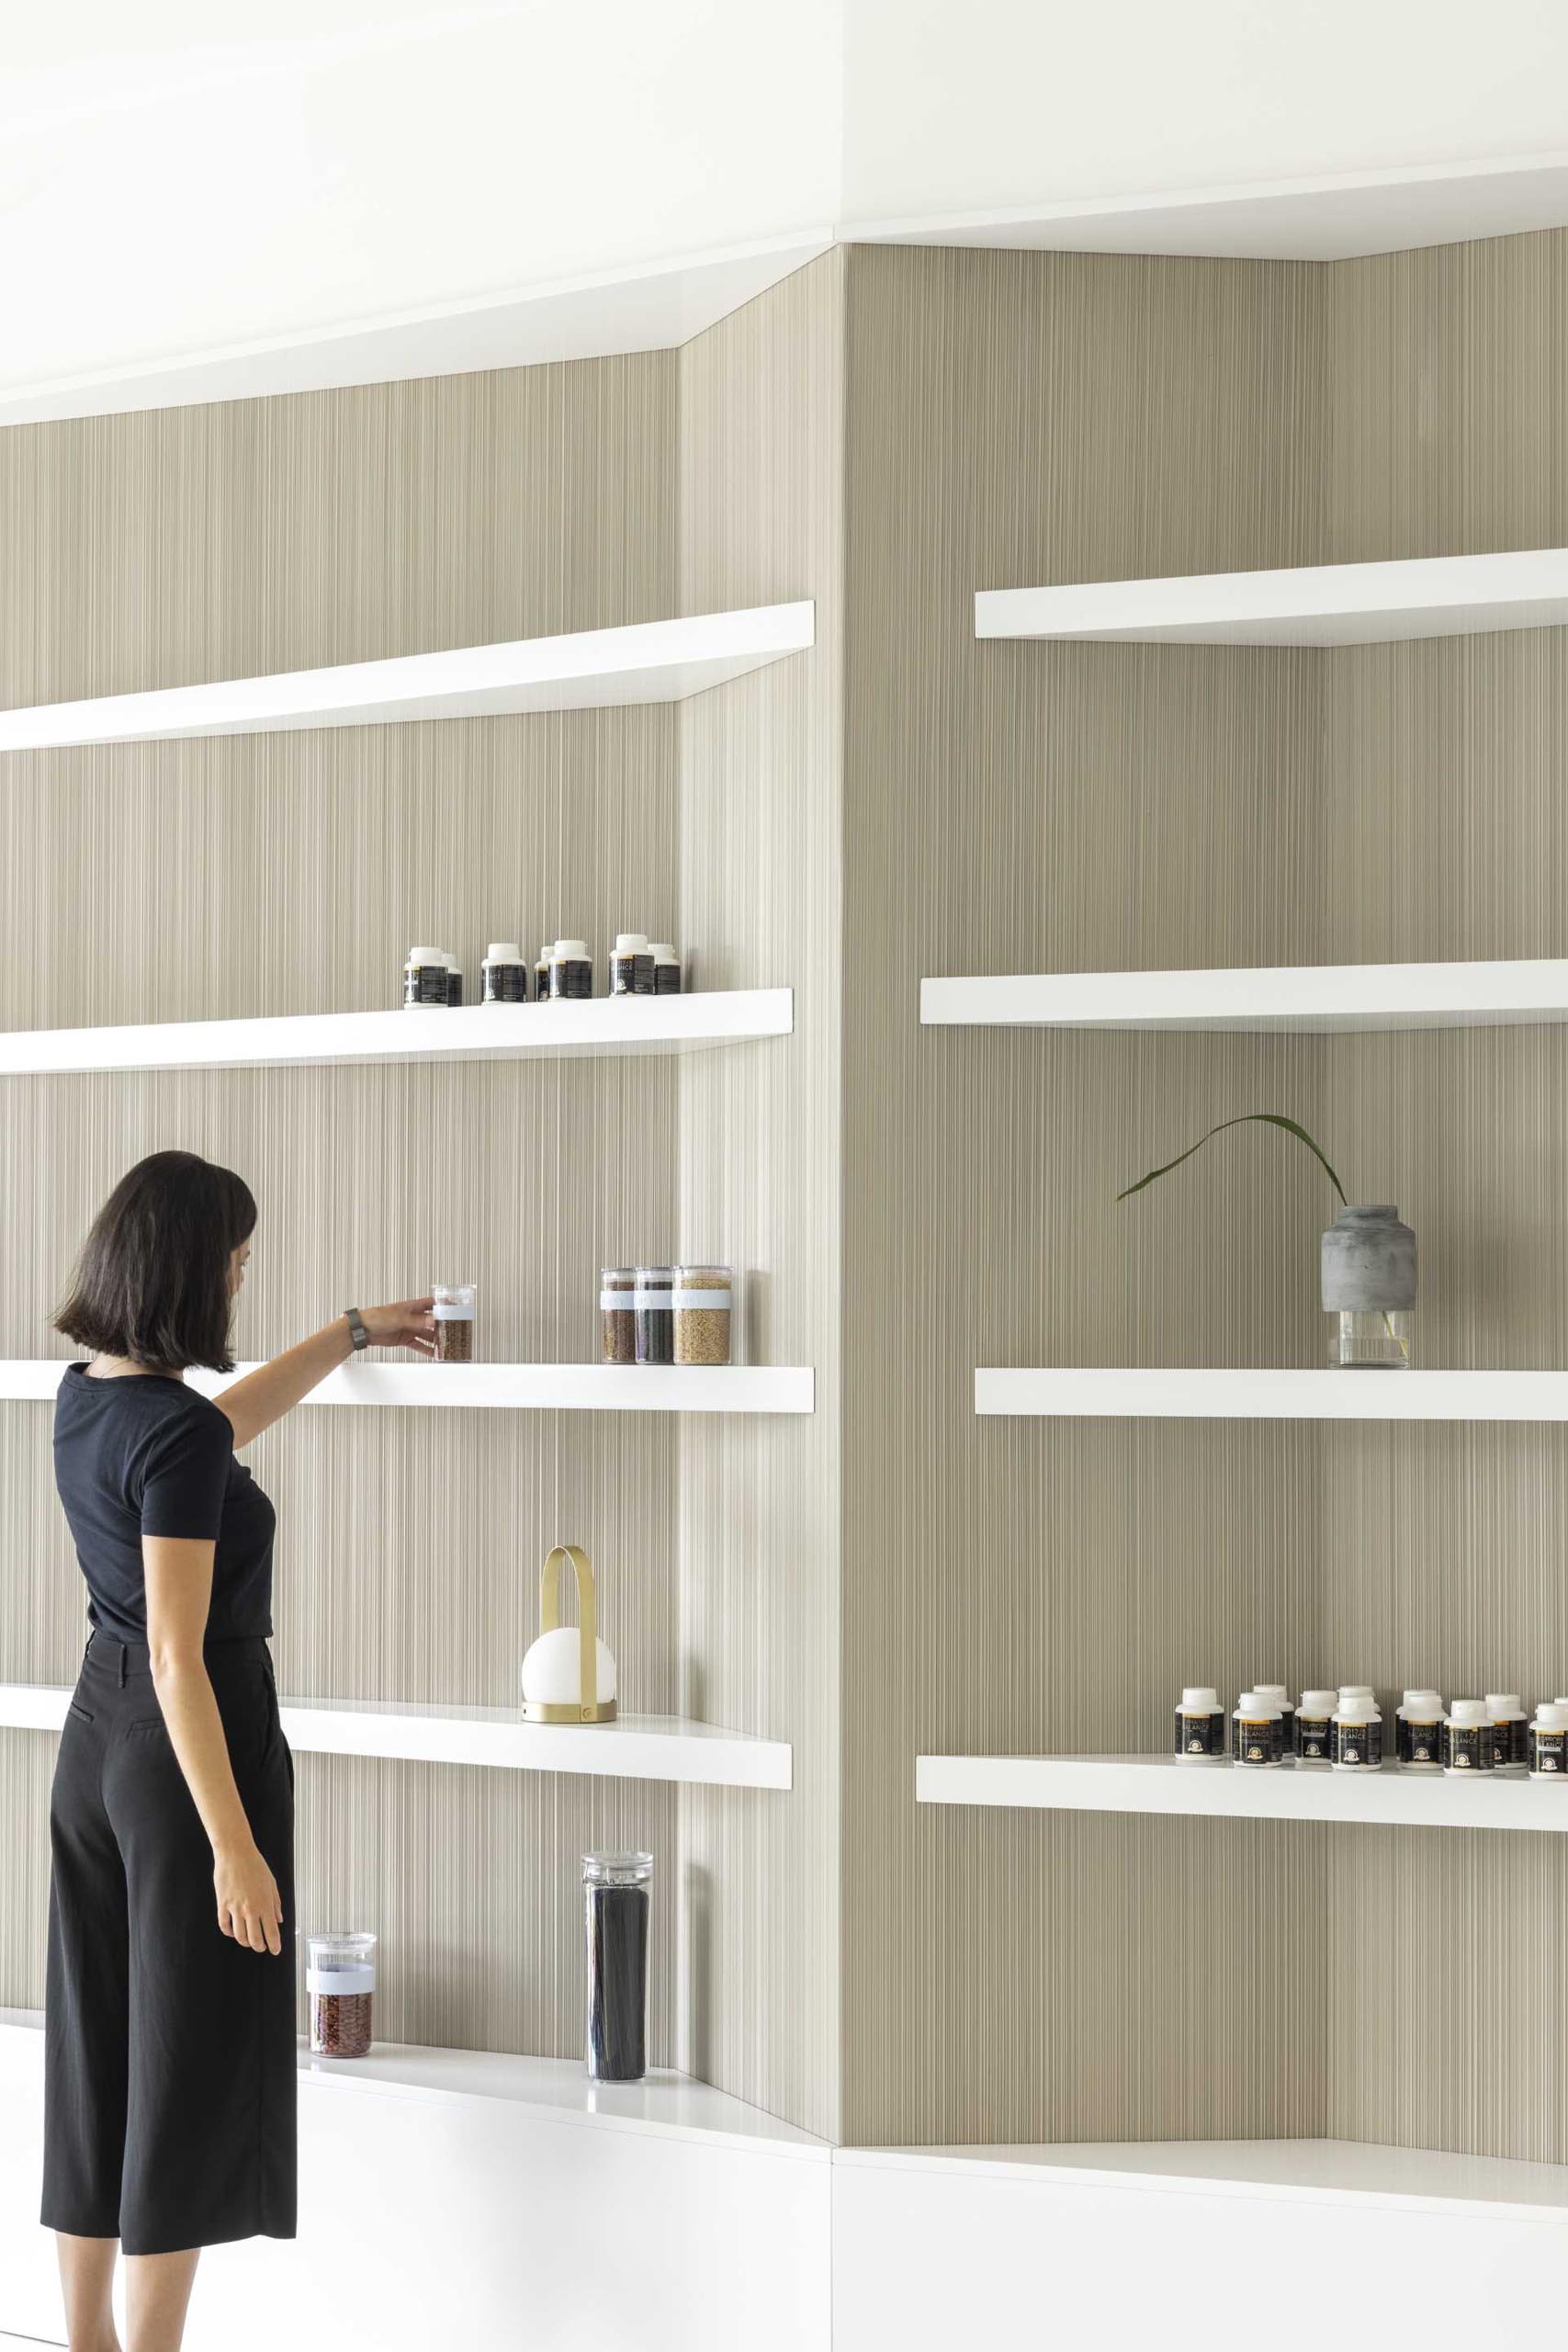 A modern health clinic with a natural color palette includes white display shelves.